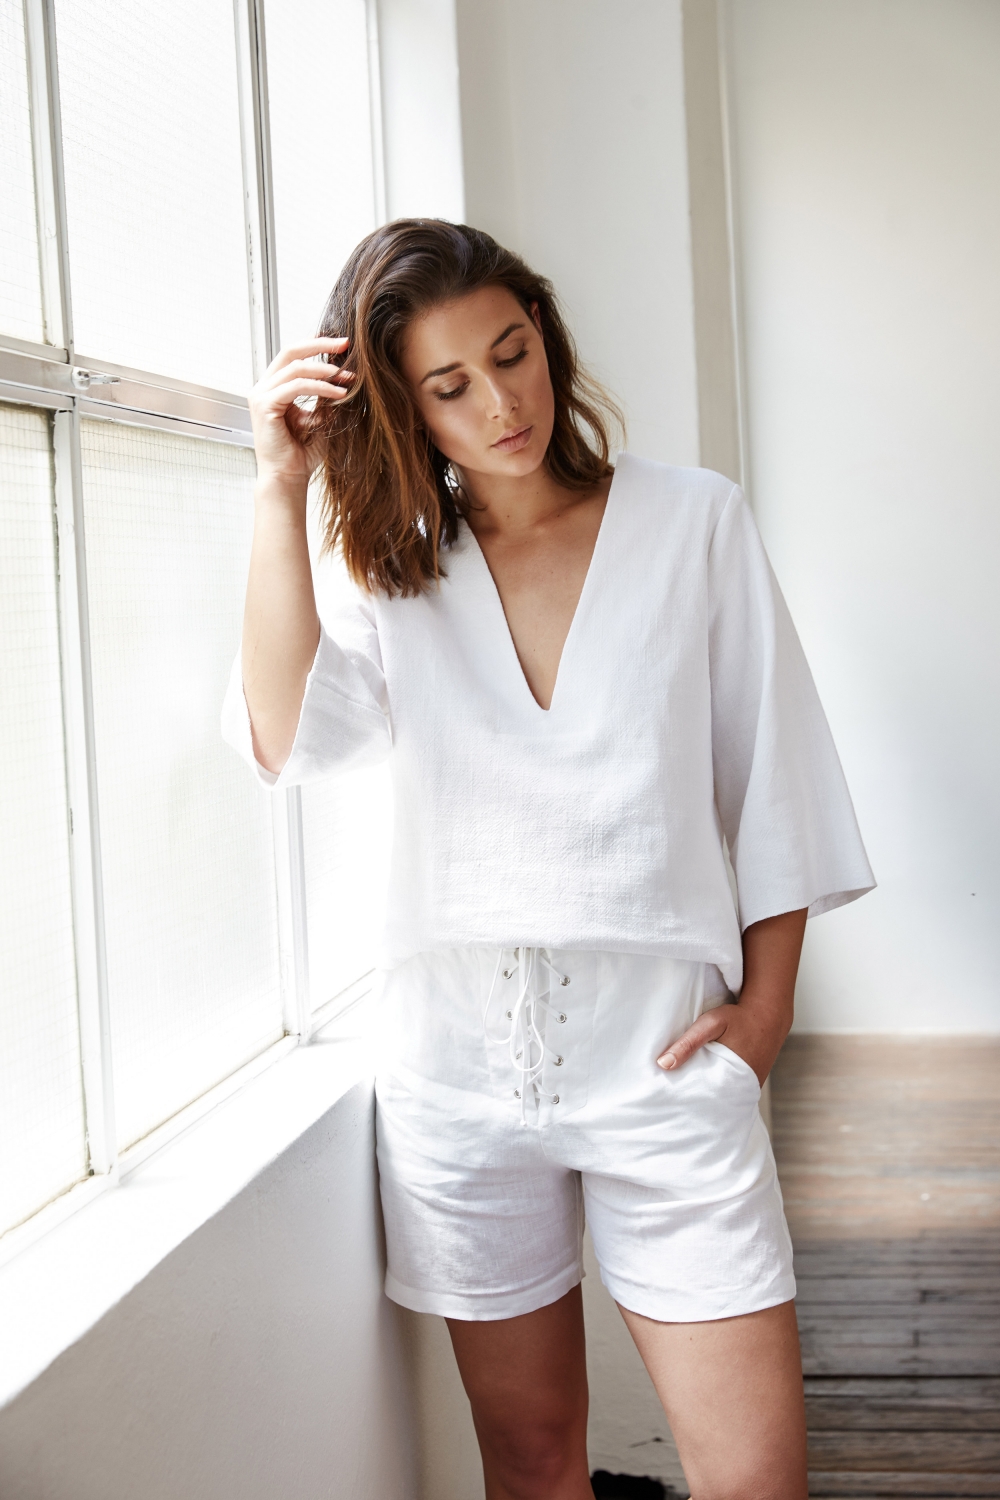 Harper and Harely Australian Blogger Sara Donaldson wears all white in latest Editorial